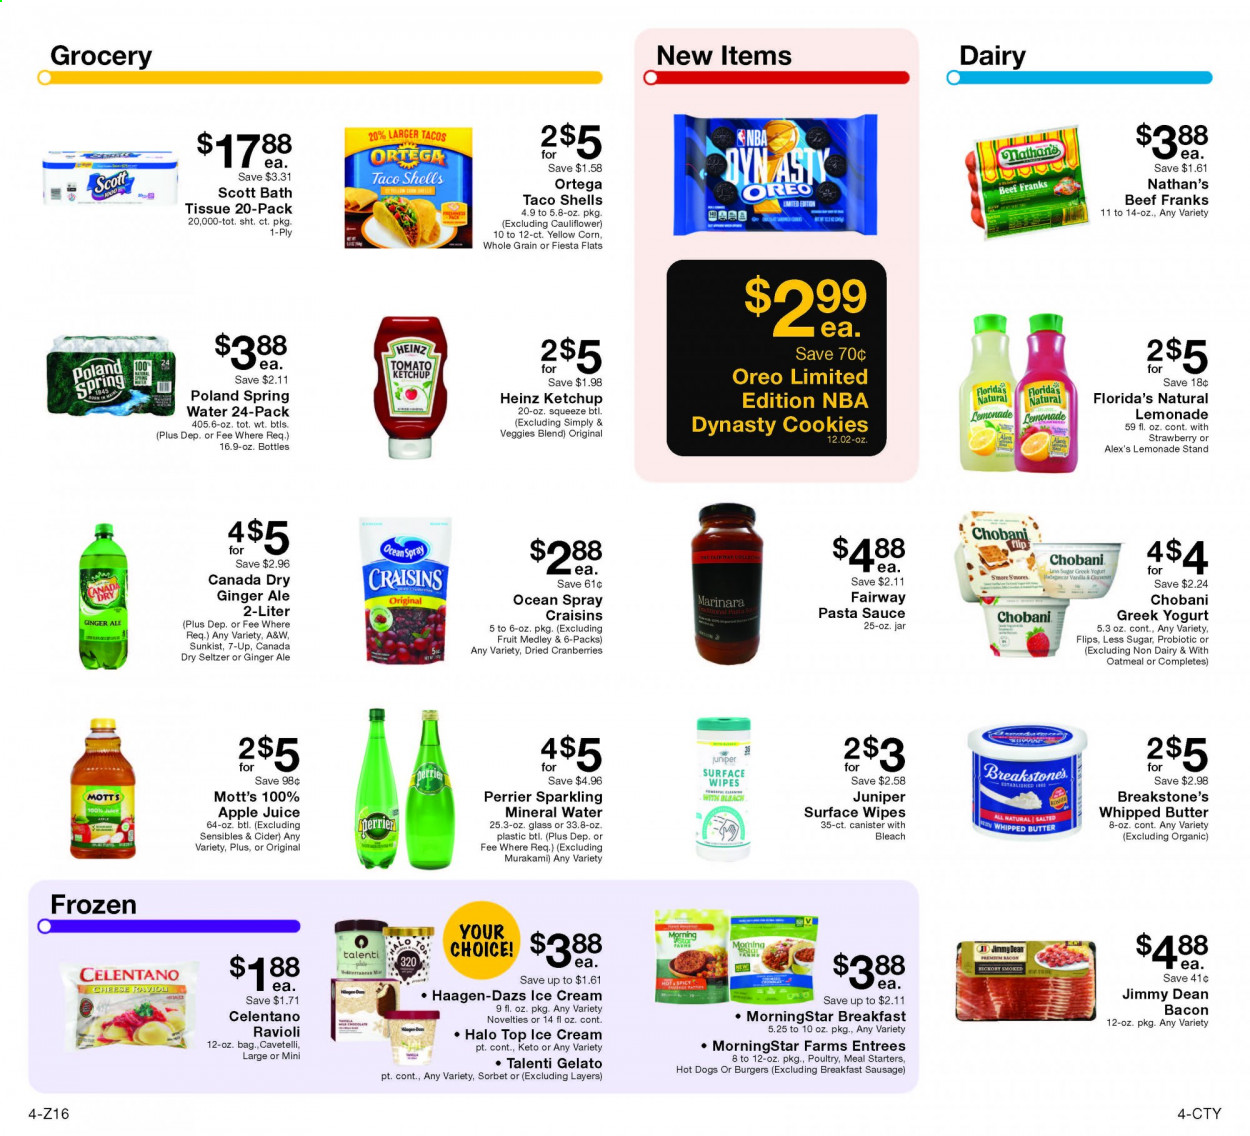 thumbnail - Fairway Market Flyer - 04/02/2021 - 04/08/2021 - Sales products - tacos, cauliflower, corn, hot dog, pasta sauce, sauce, MorningStar Farms, Jimmy Dean, bacon, sausage, cheese, greek yoghurt, Oreo, yoghurt, Chobani, whipped butter, ice cream, Häagen-Dazs, Talenti Gelato, gelato, cookies, Florida's Natural, oatmeal, craisins, Heinz, ravioli, ketchup, dried fruit, apple juice, Canada Dry, ginger ale, lemonade, juice, 7UP, A&W, Mott's, Perrier, mineral water, seltzer water, spring water, sparkling water, tea, apple cider. Page 4.